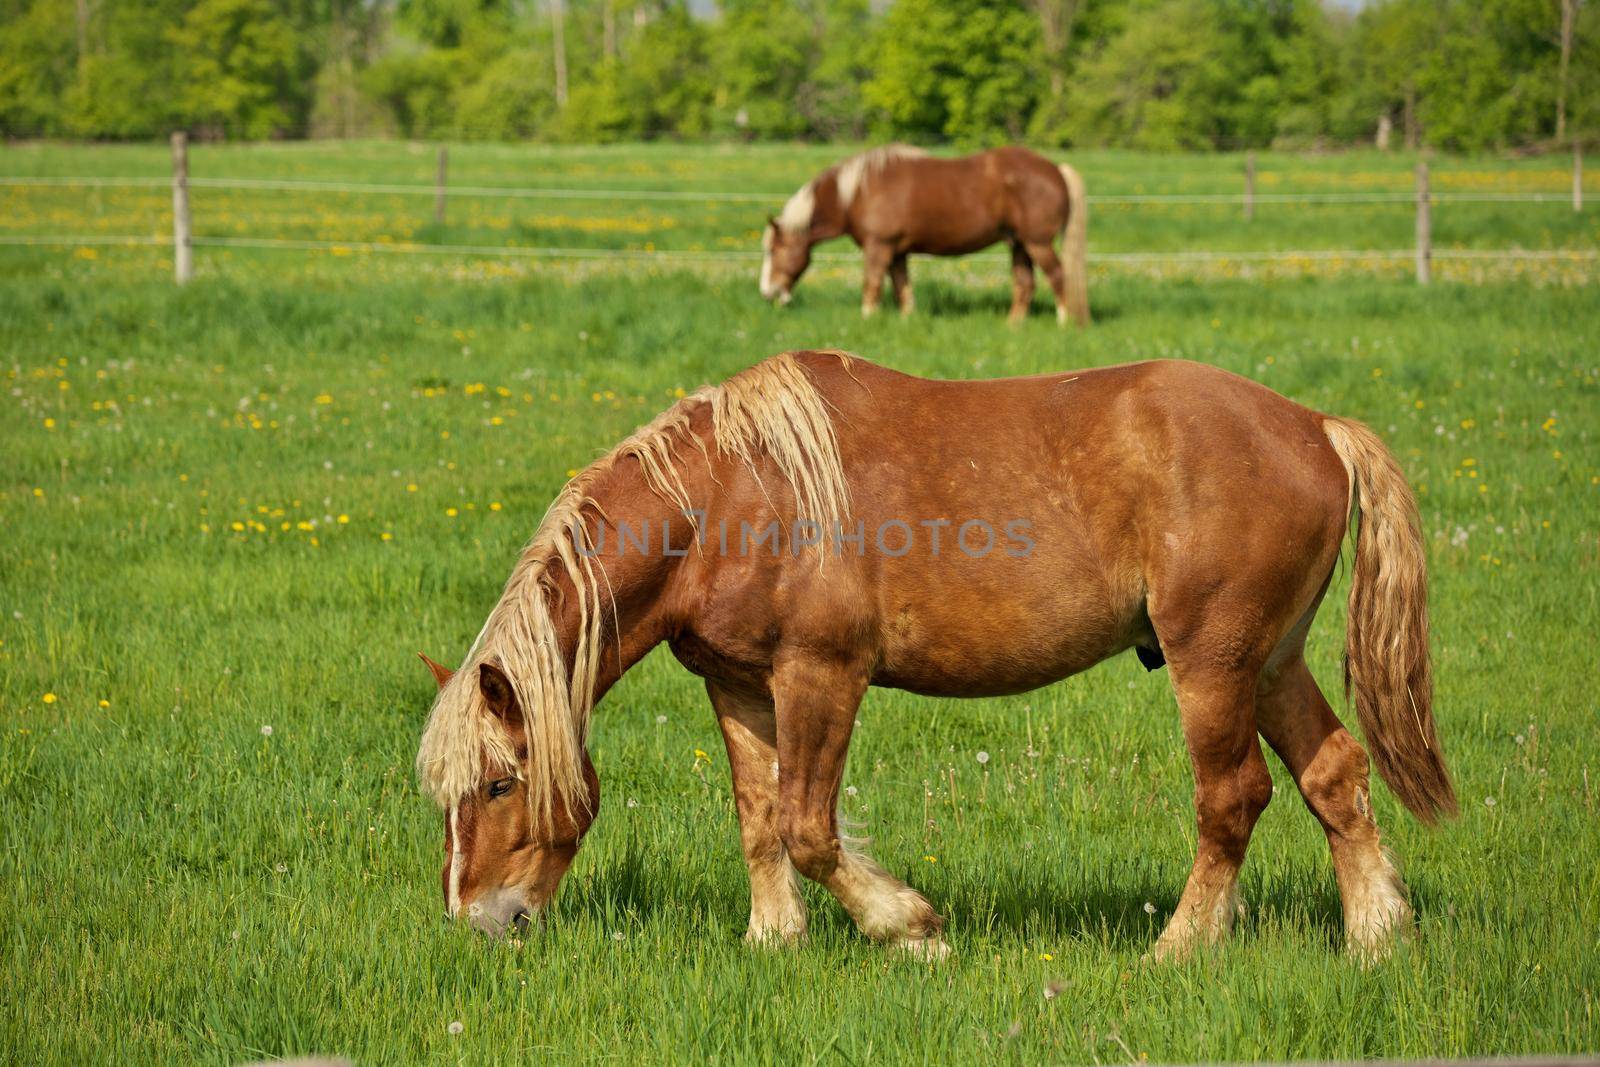 A Male Flaxen Chestnut Horse Stallion Colt Grazing in a Pasture Meadow on a Sunny Day. High quality photo